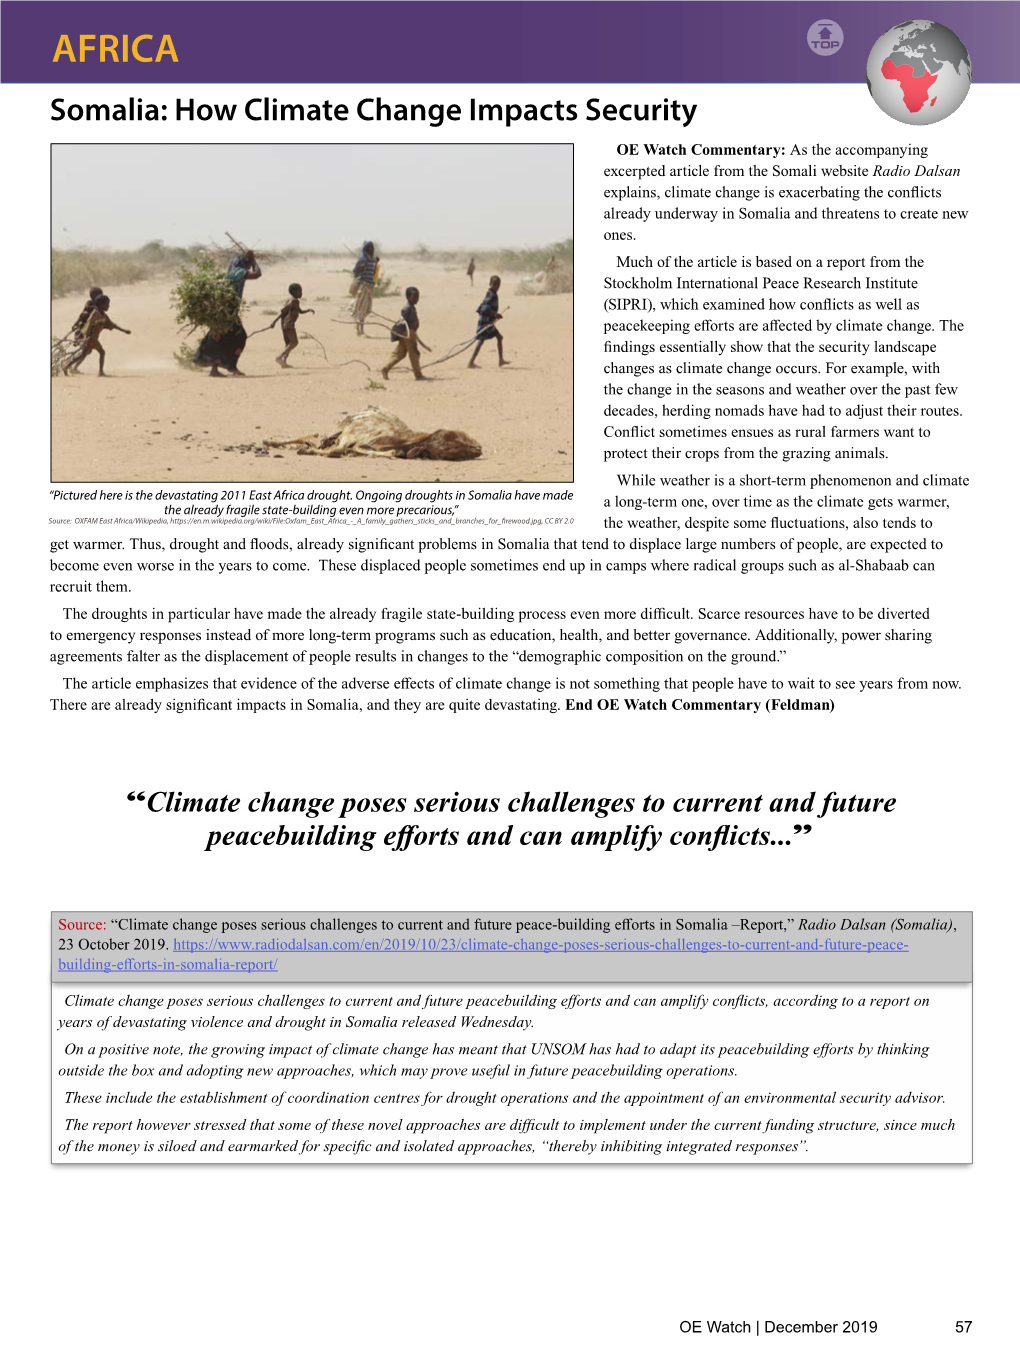 Somalia: How Climate Change Impacts Security